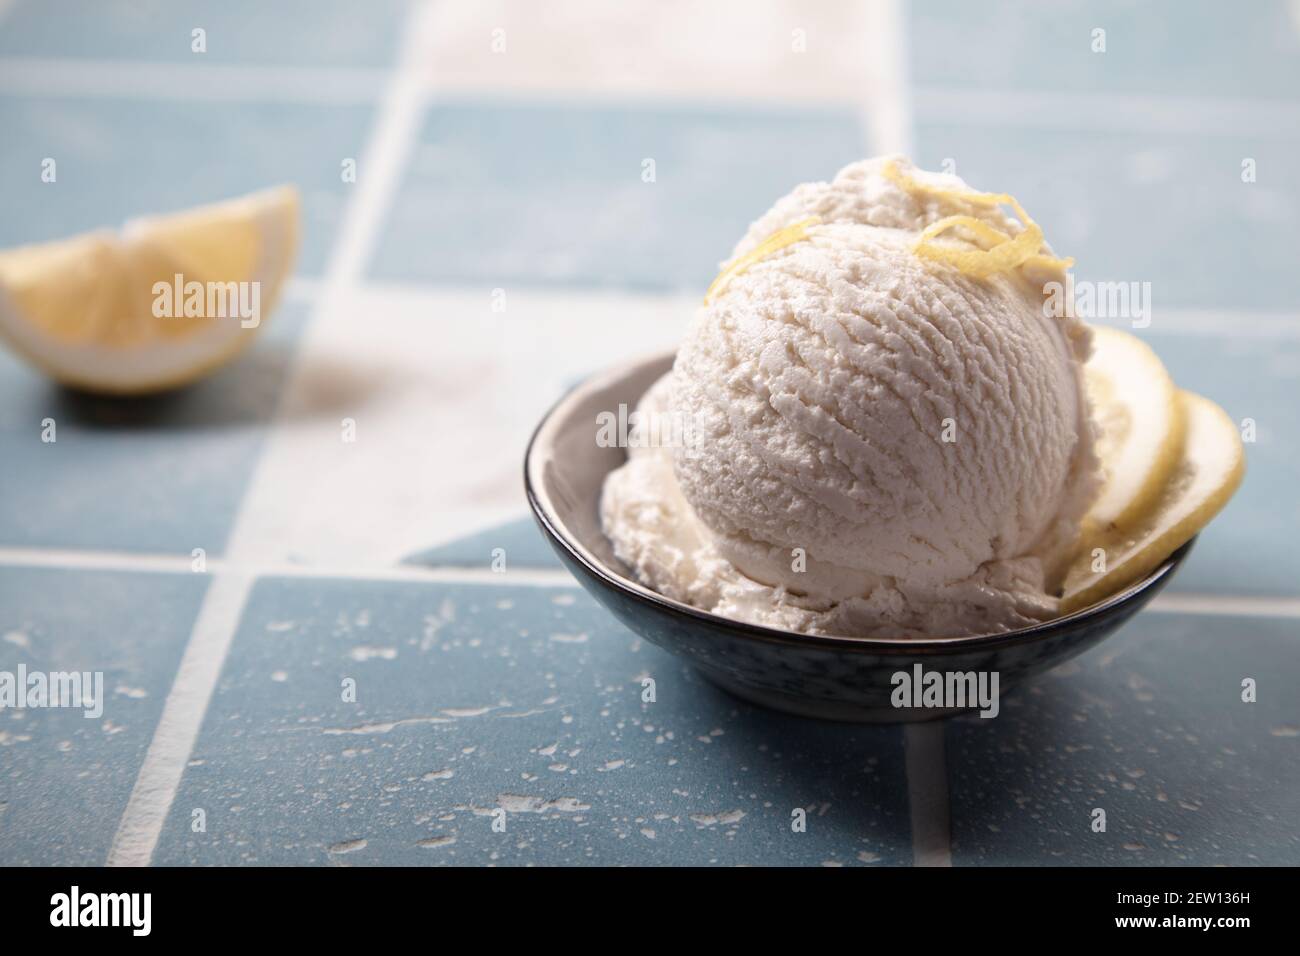 Delicious gelato scoop with ripe citrus fruit slices and lemon zest on top on tiled surface Stock Photo